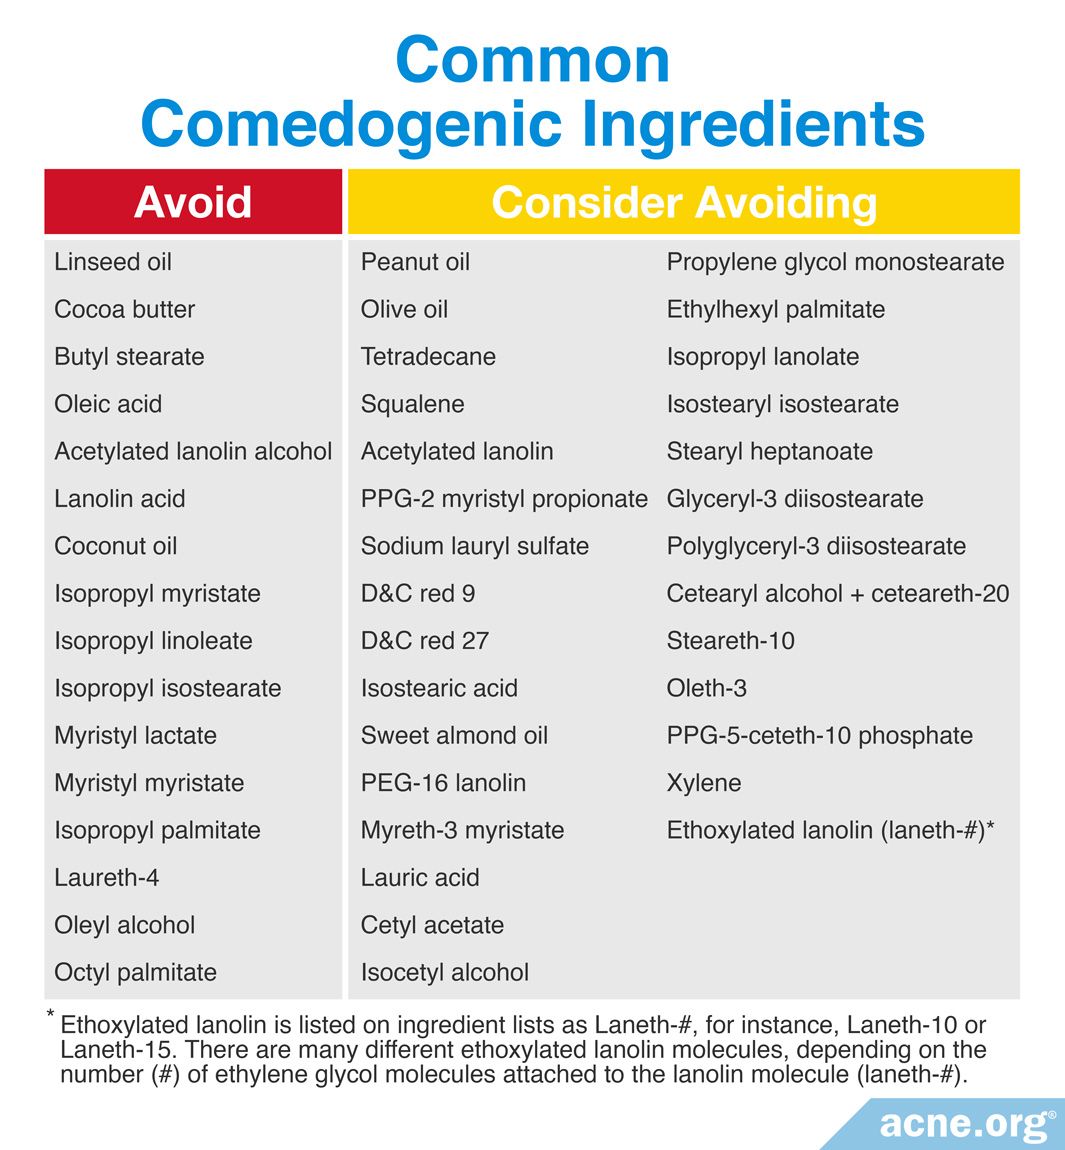 What Is Comedogenicity, and What Ingredients Are Comedogenic? – Acne.org